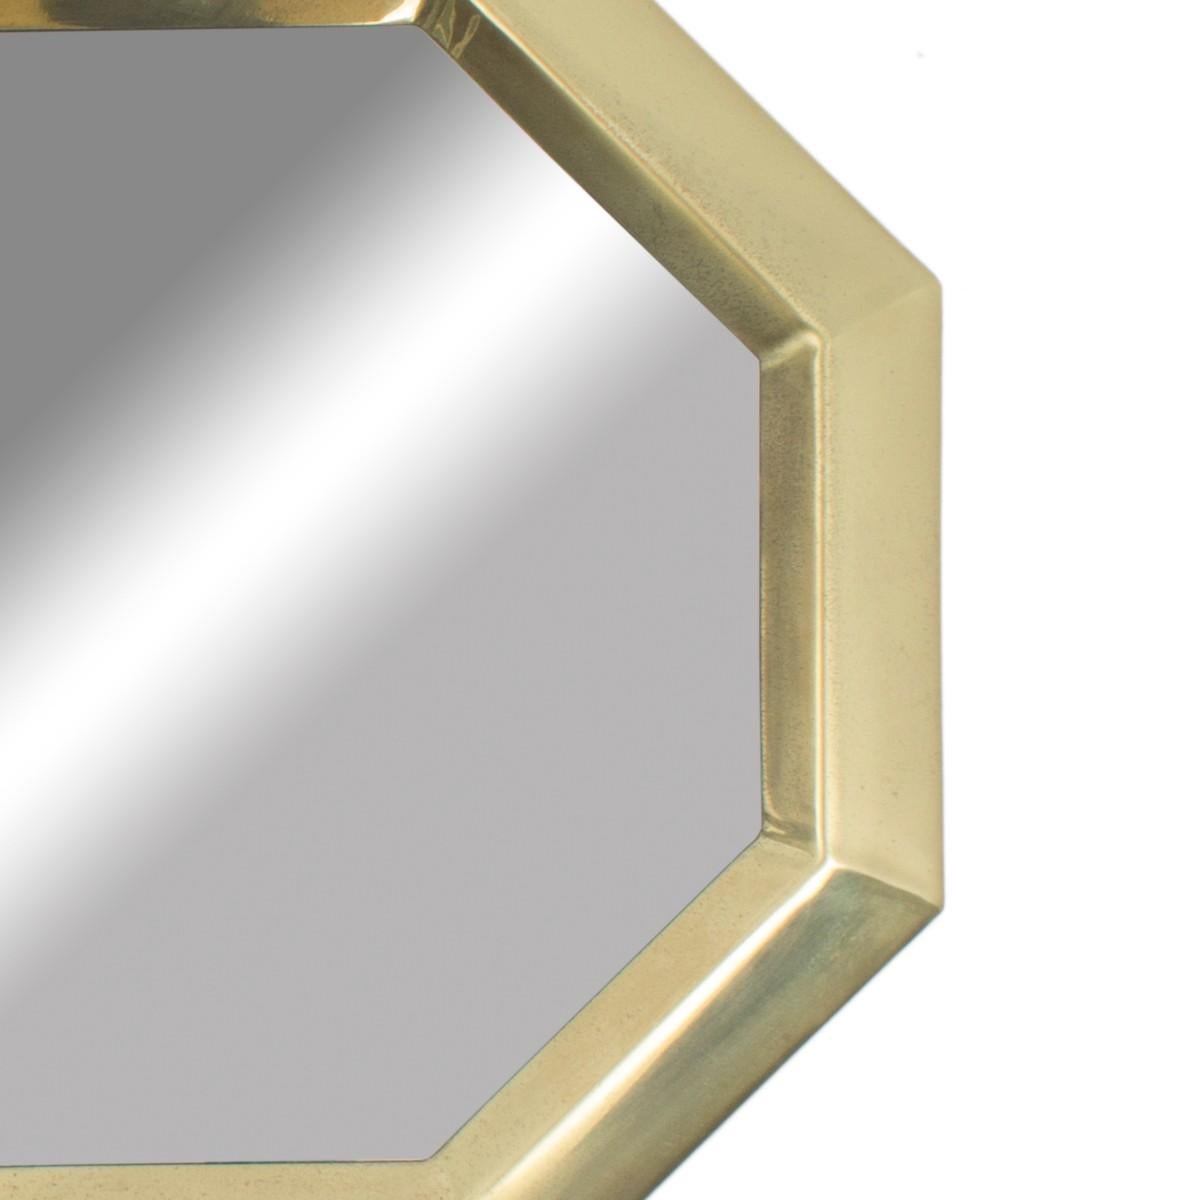 A brass hexagonal-shaped wall mirror in the style f Mastercraft. Imported, circa 2000.